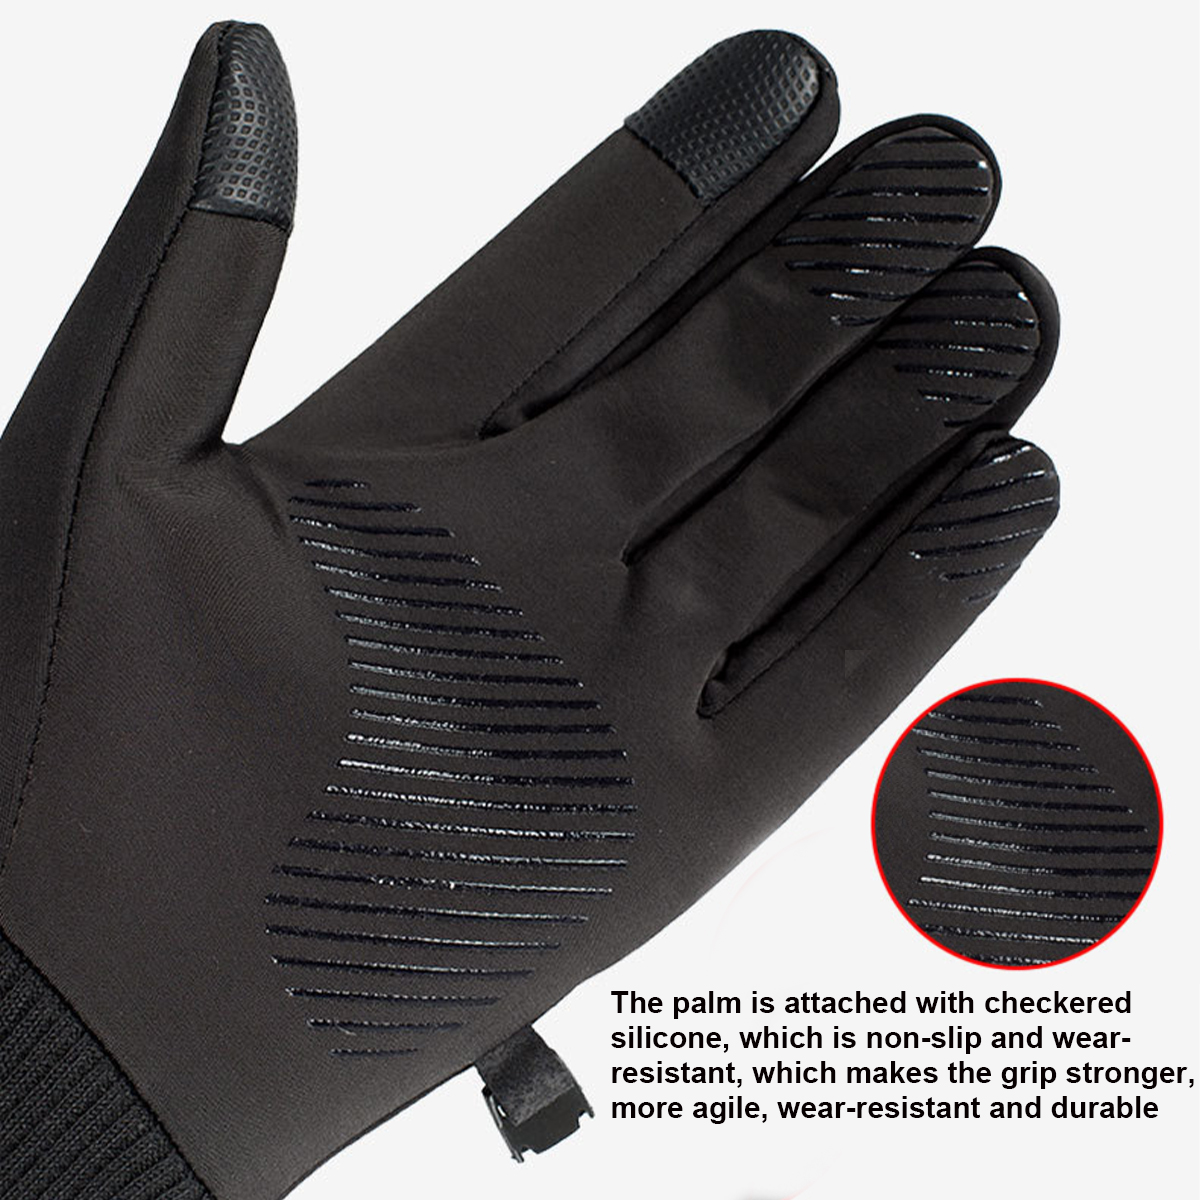 Winter-Warm-Waterproof-Windproof-Anti-Slip-Touch-Screen-Outdoors-Motorcycle-Riding-Gloves-1781887-6